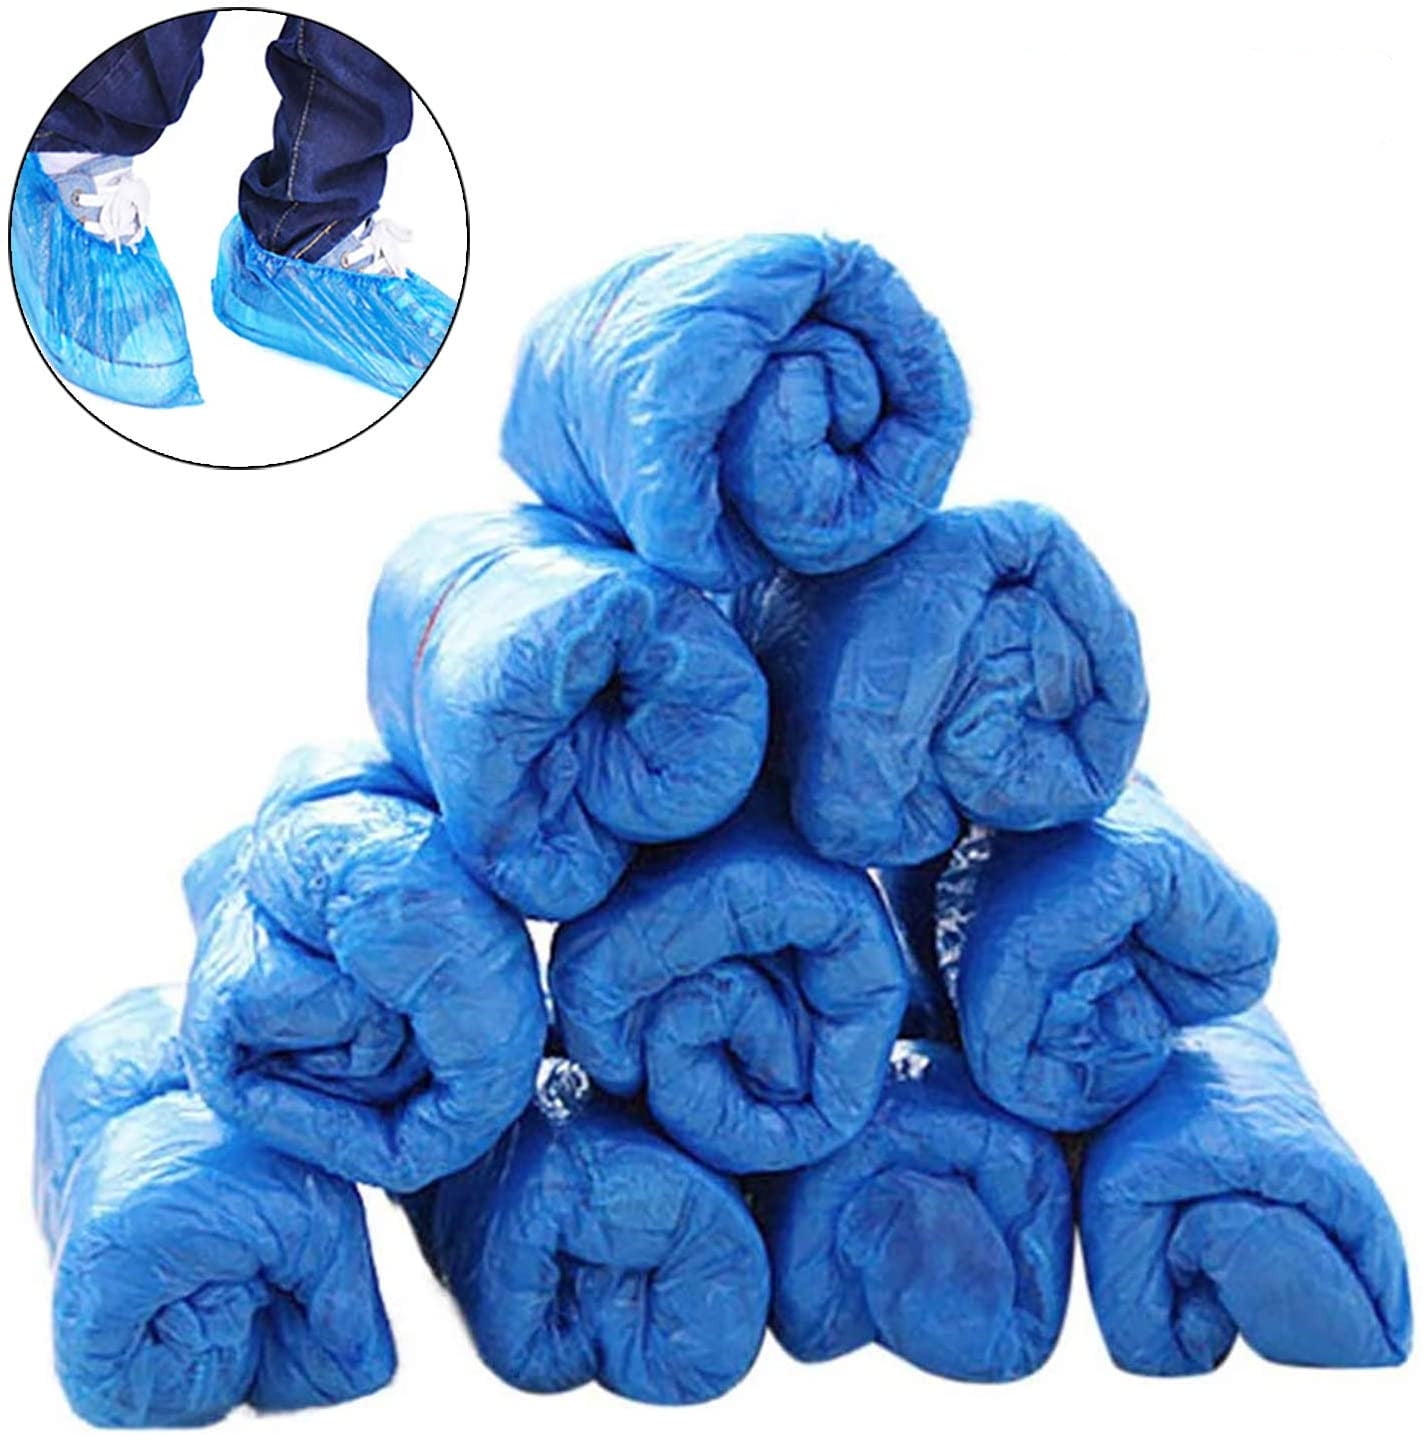 48 Piece Premium Quality Blue Disposable Overshoes Shoe Covers Protects Shoe 24 